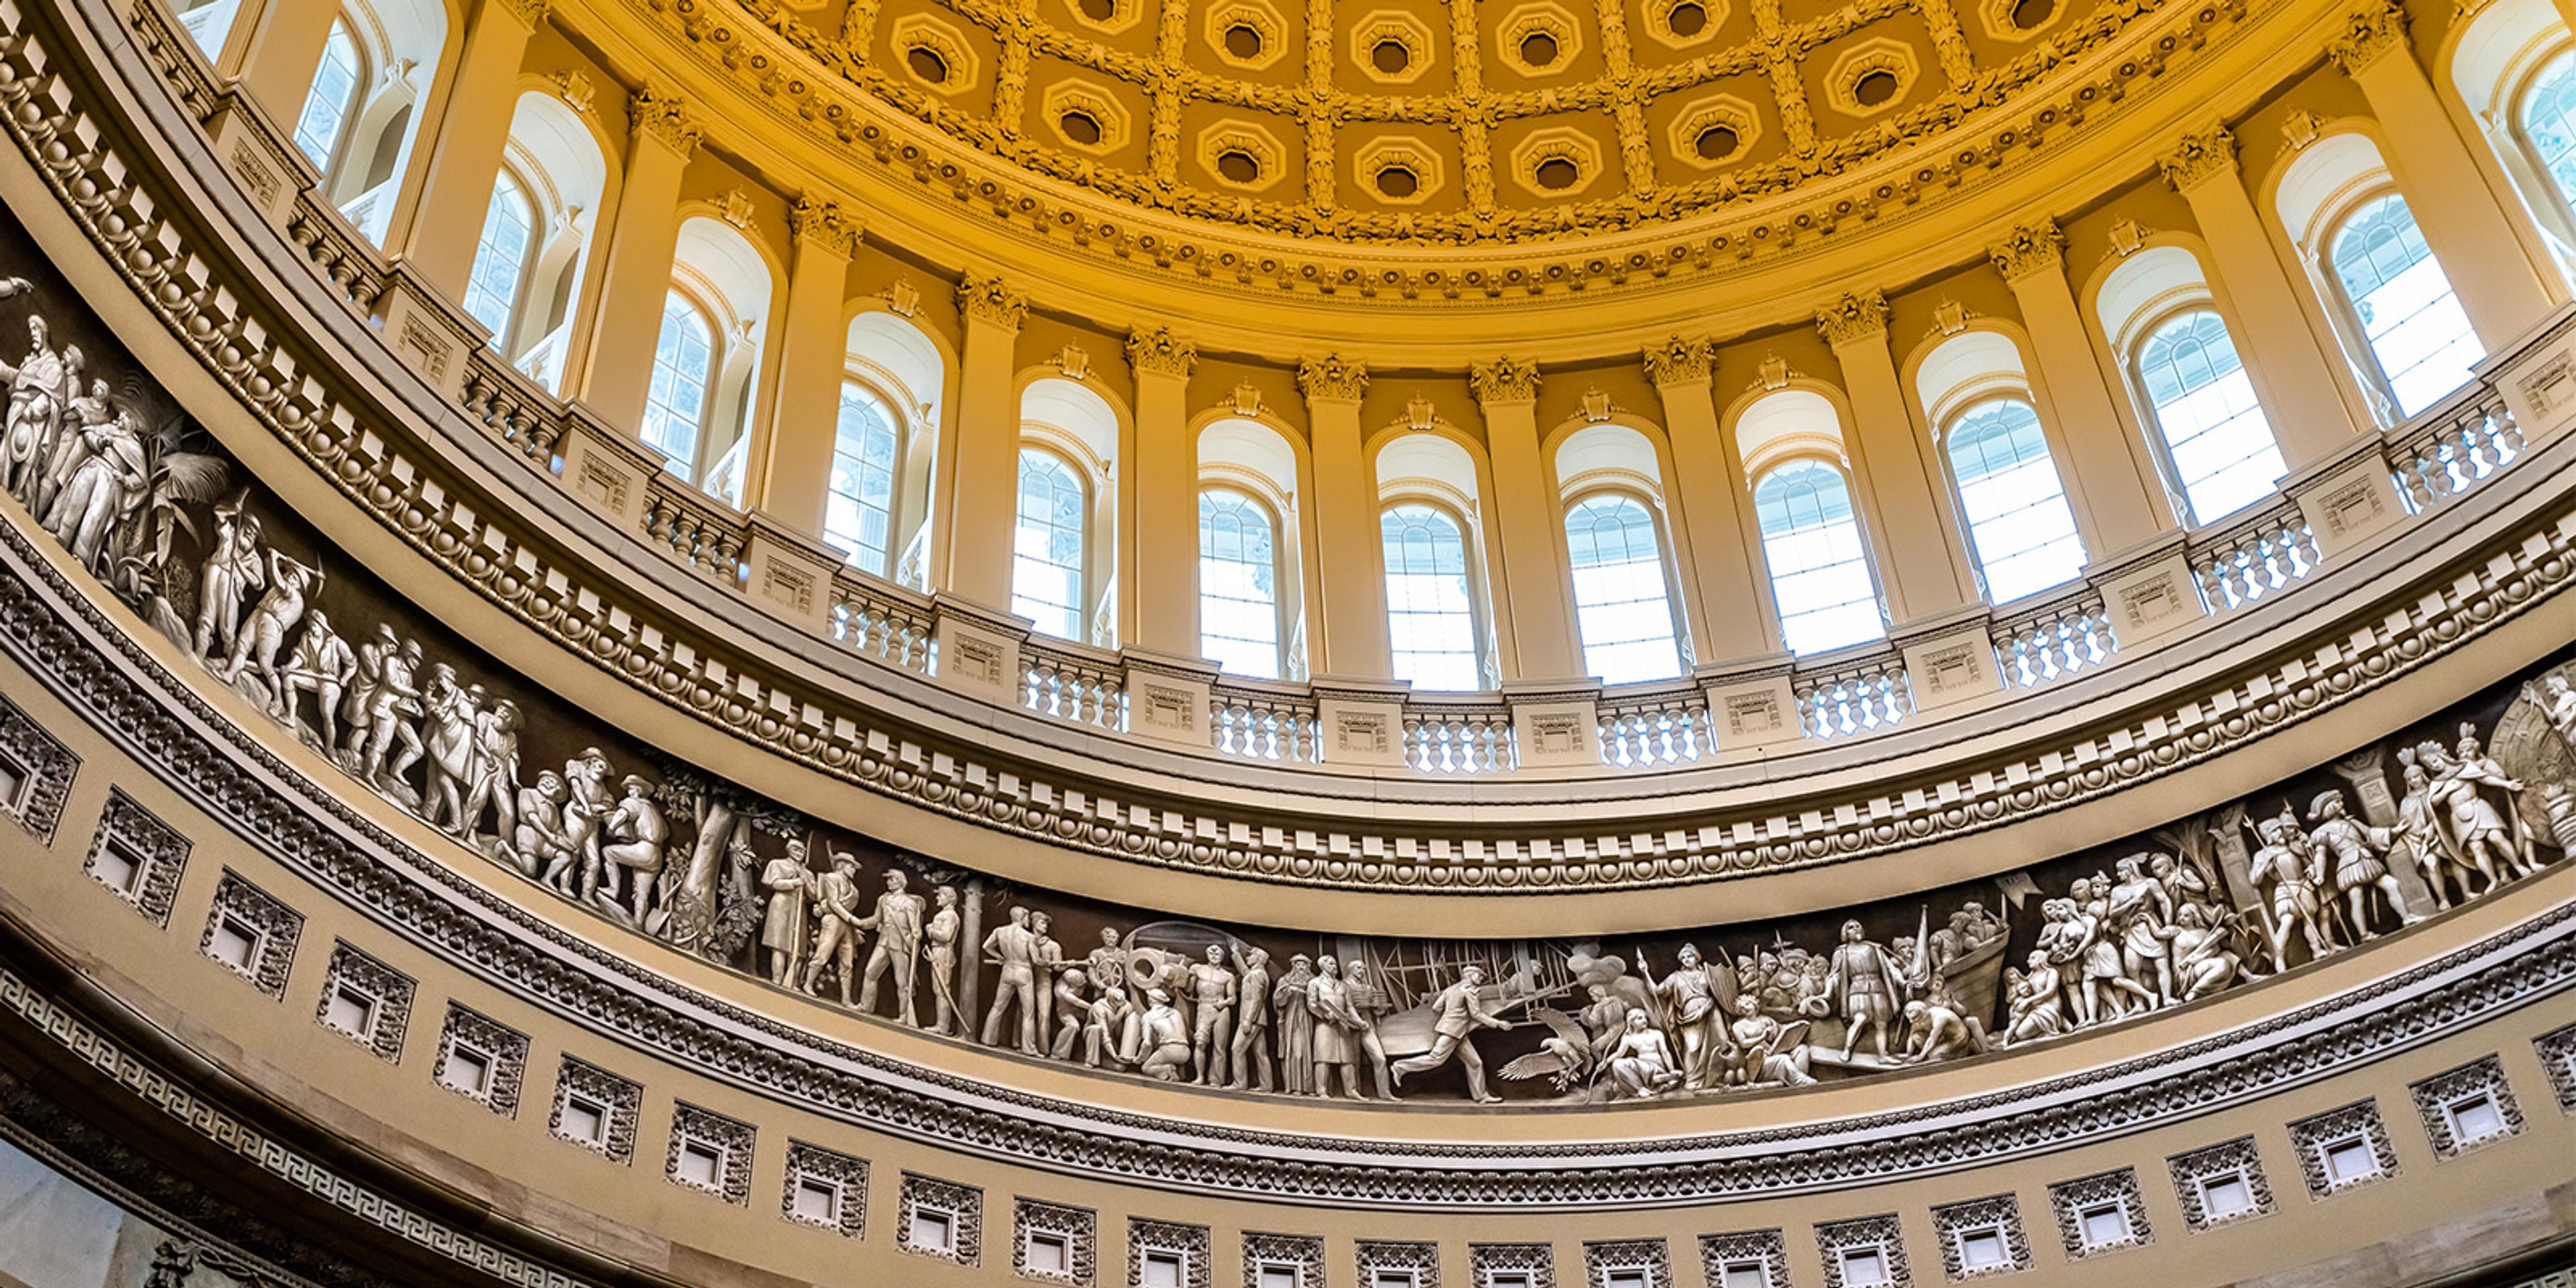 The dome in the U.S. Capitol in Washington, D.C.